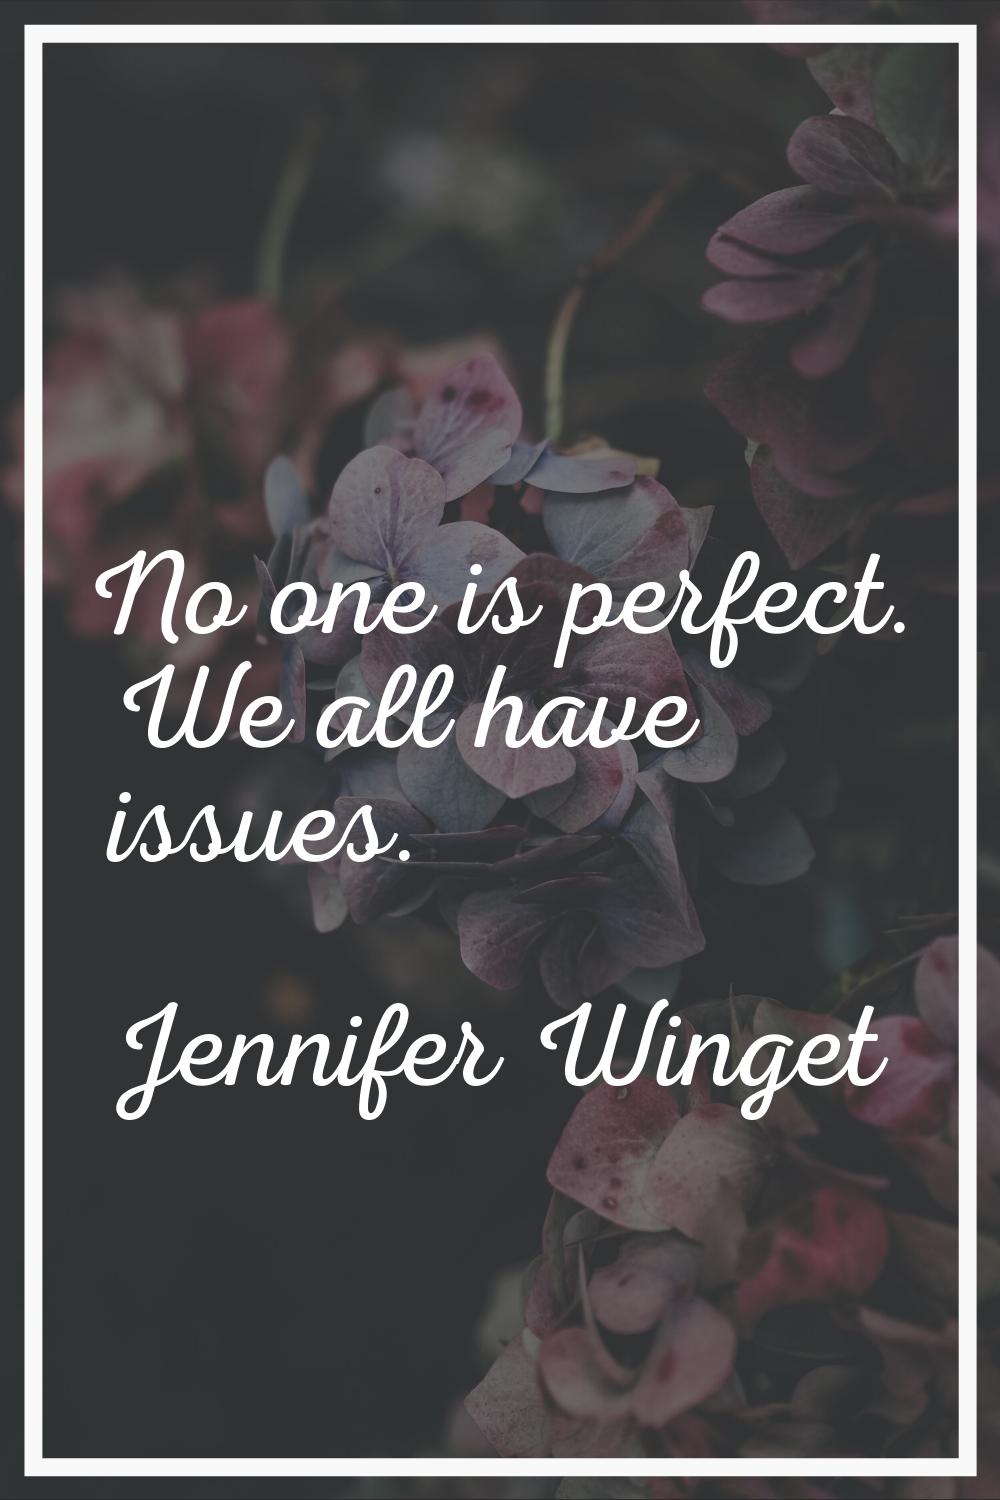 No one is perfect. We all have issues.